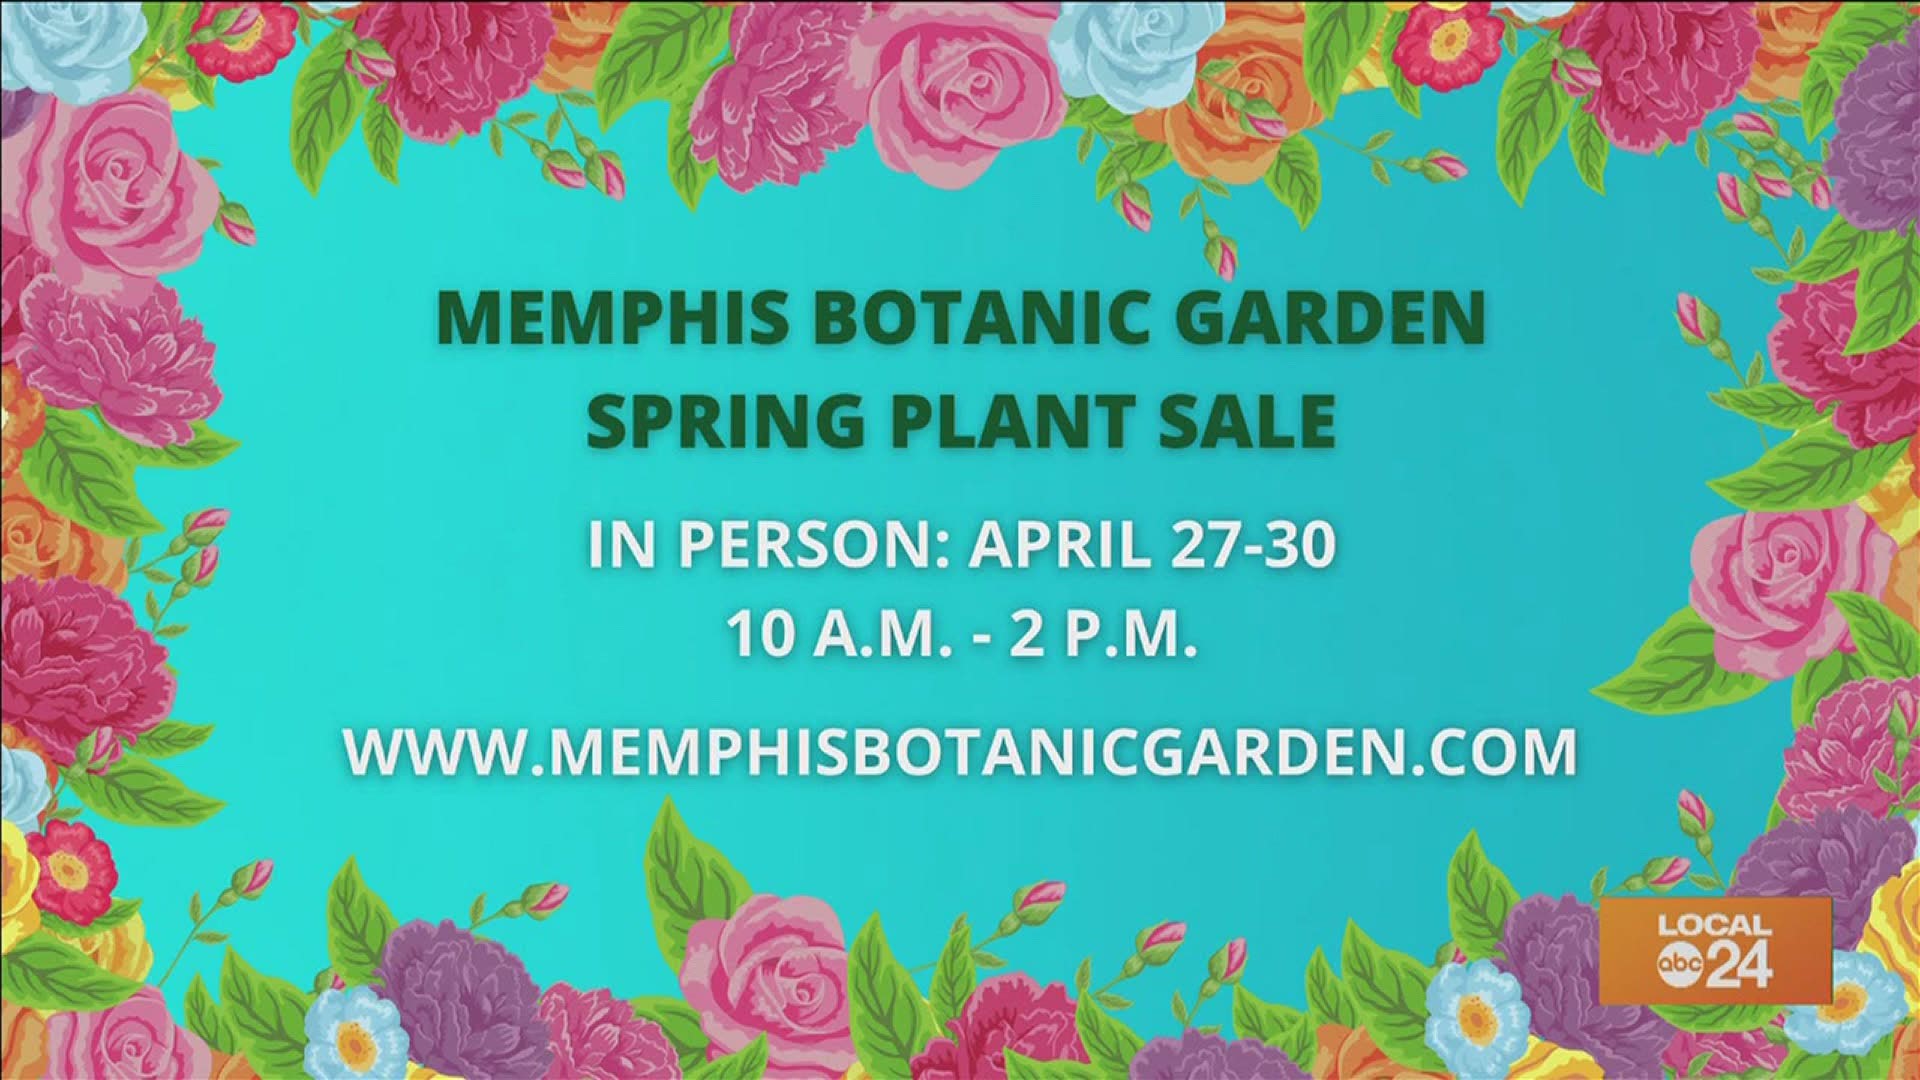 Looking to refresh your home this year? The Memphis Botanic Garden (MBG)'s annual spring plant sale is back with a whole lot more in store from herbs to perennials!